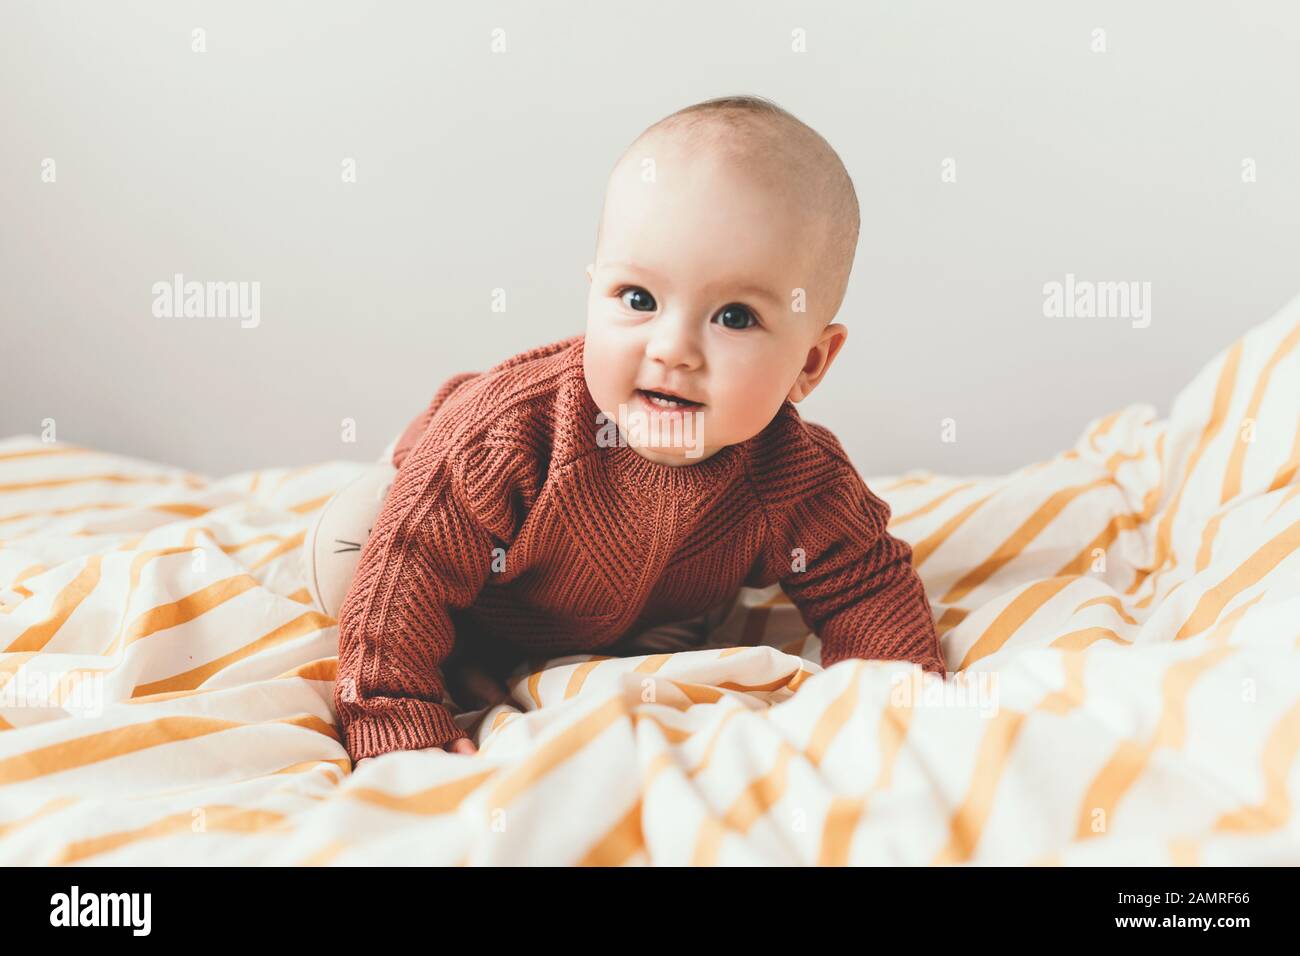 Beautiful little baby girl on the bed in a cozy brown sweater smiles. Concept of motherhood and childhood. Adorable six month old baby girl lying on the bad and looking into the camera. Stock Photo